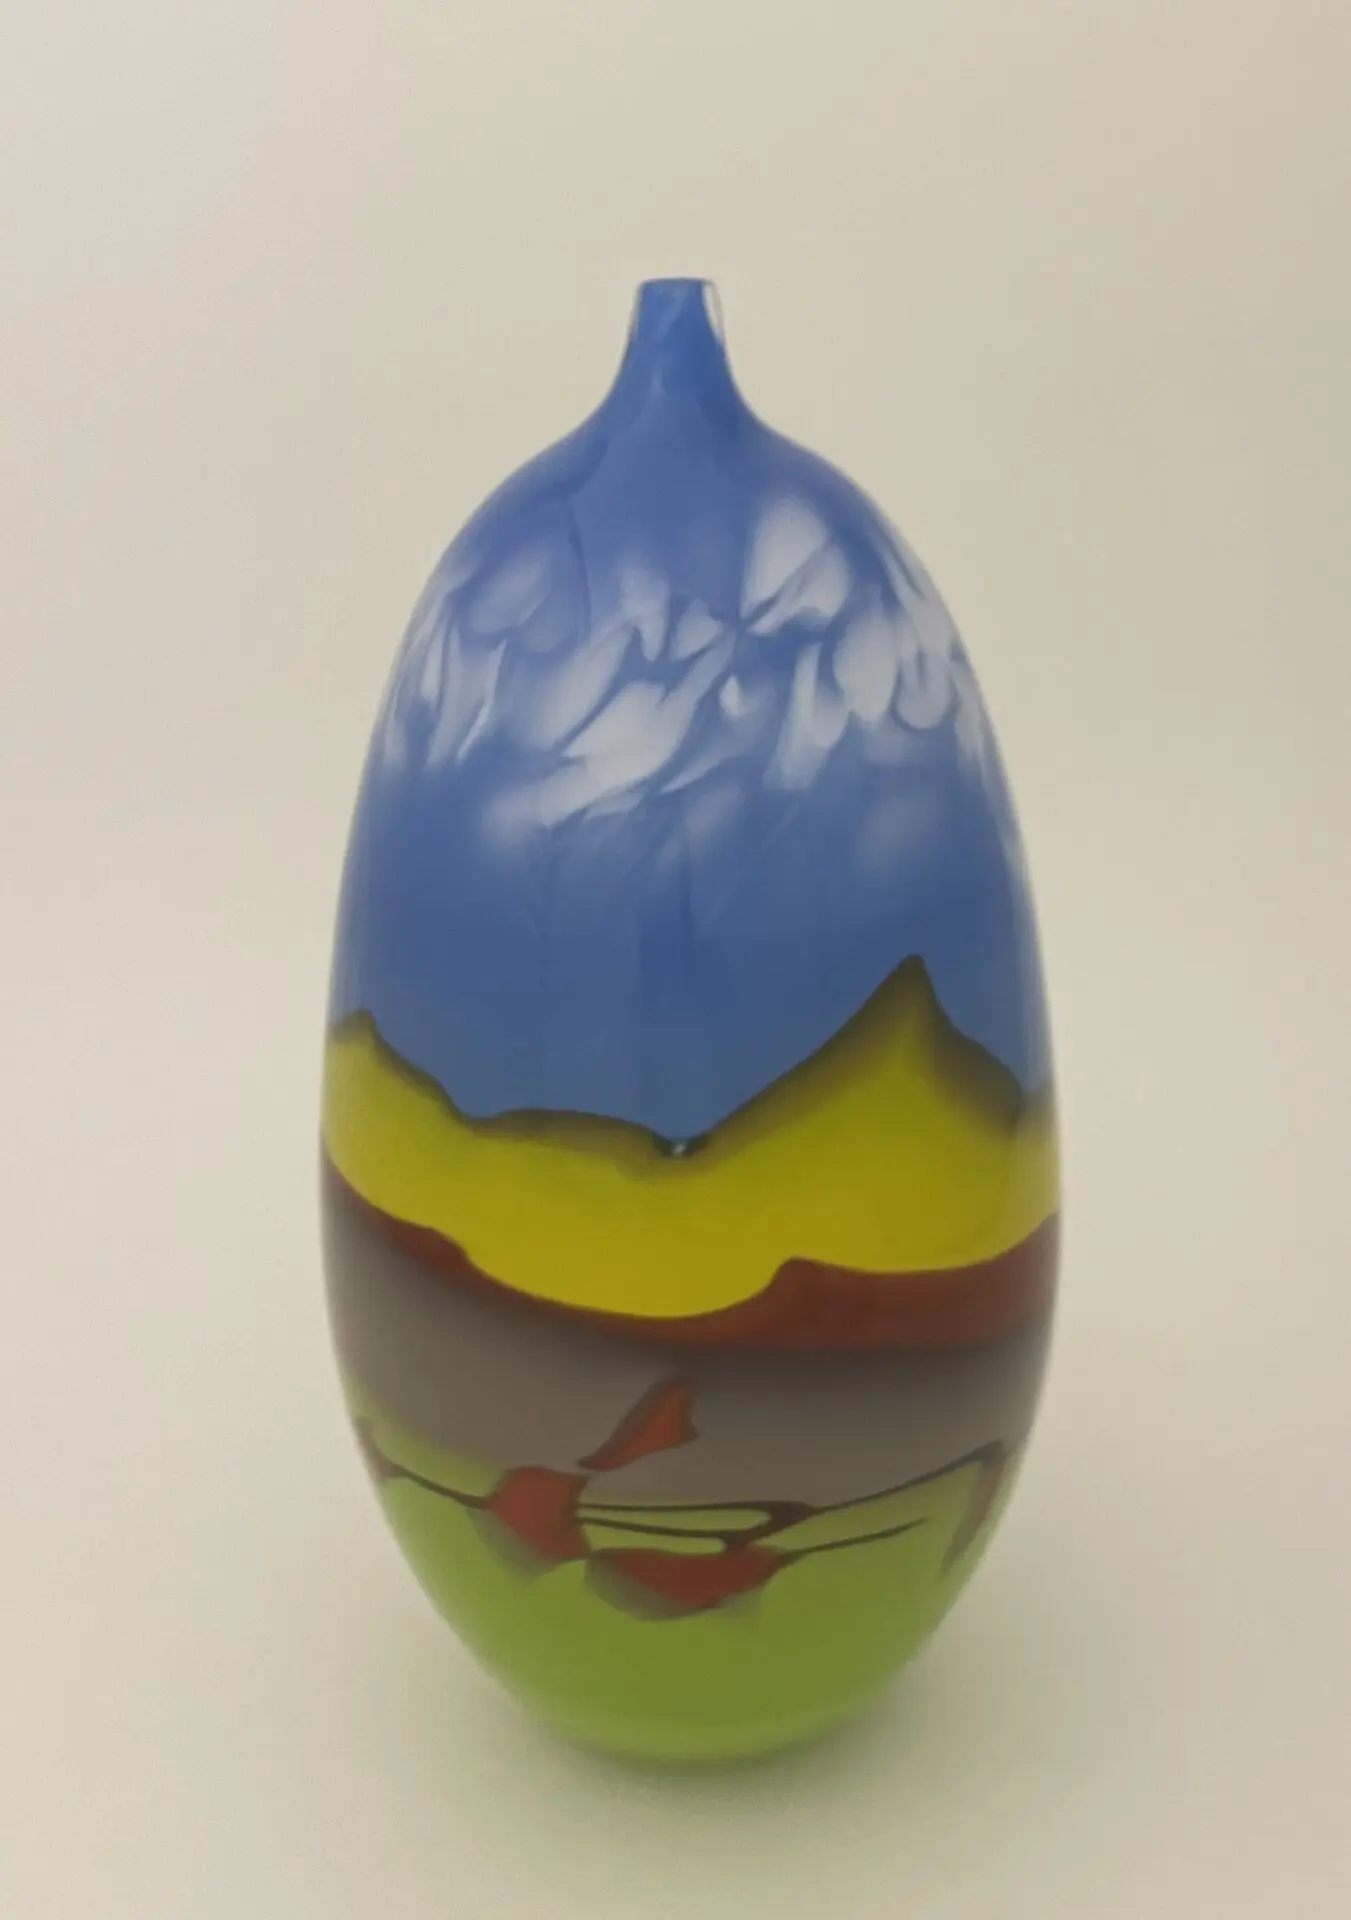 The blown glass vase by Nolan Prohaska is approximately 13" tall